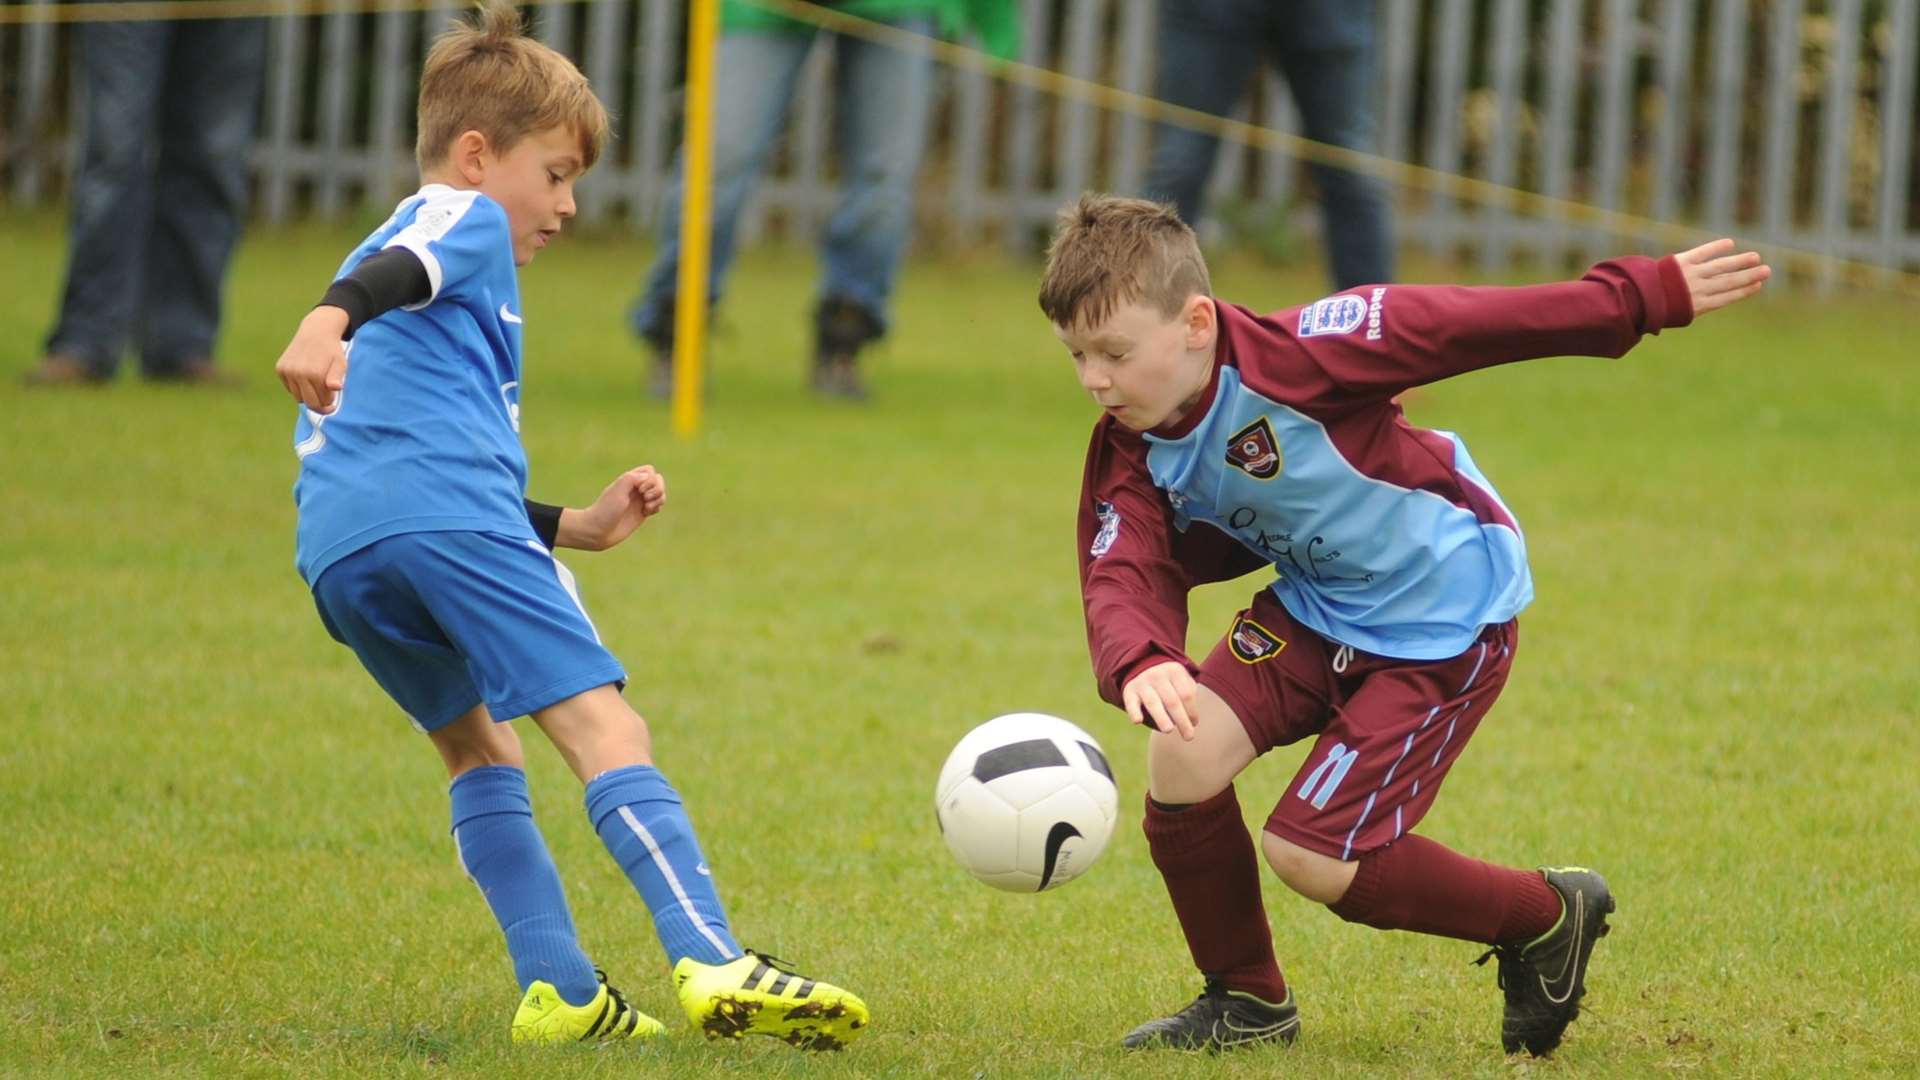 Medway United under-8s take on Wigmore Youth under-8s Picture: Steve Crispe